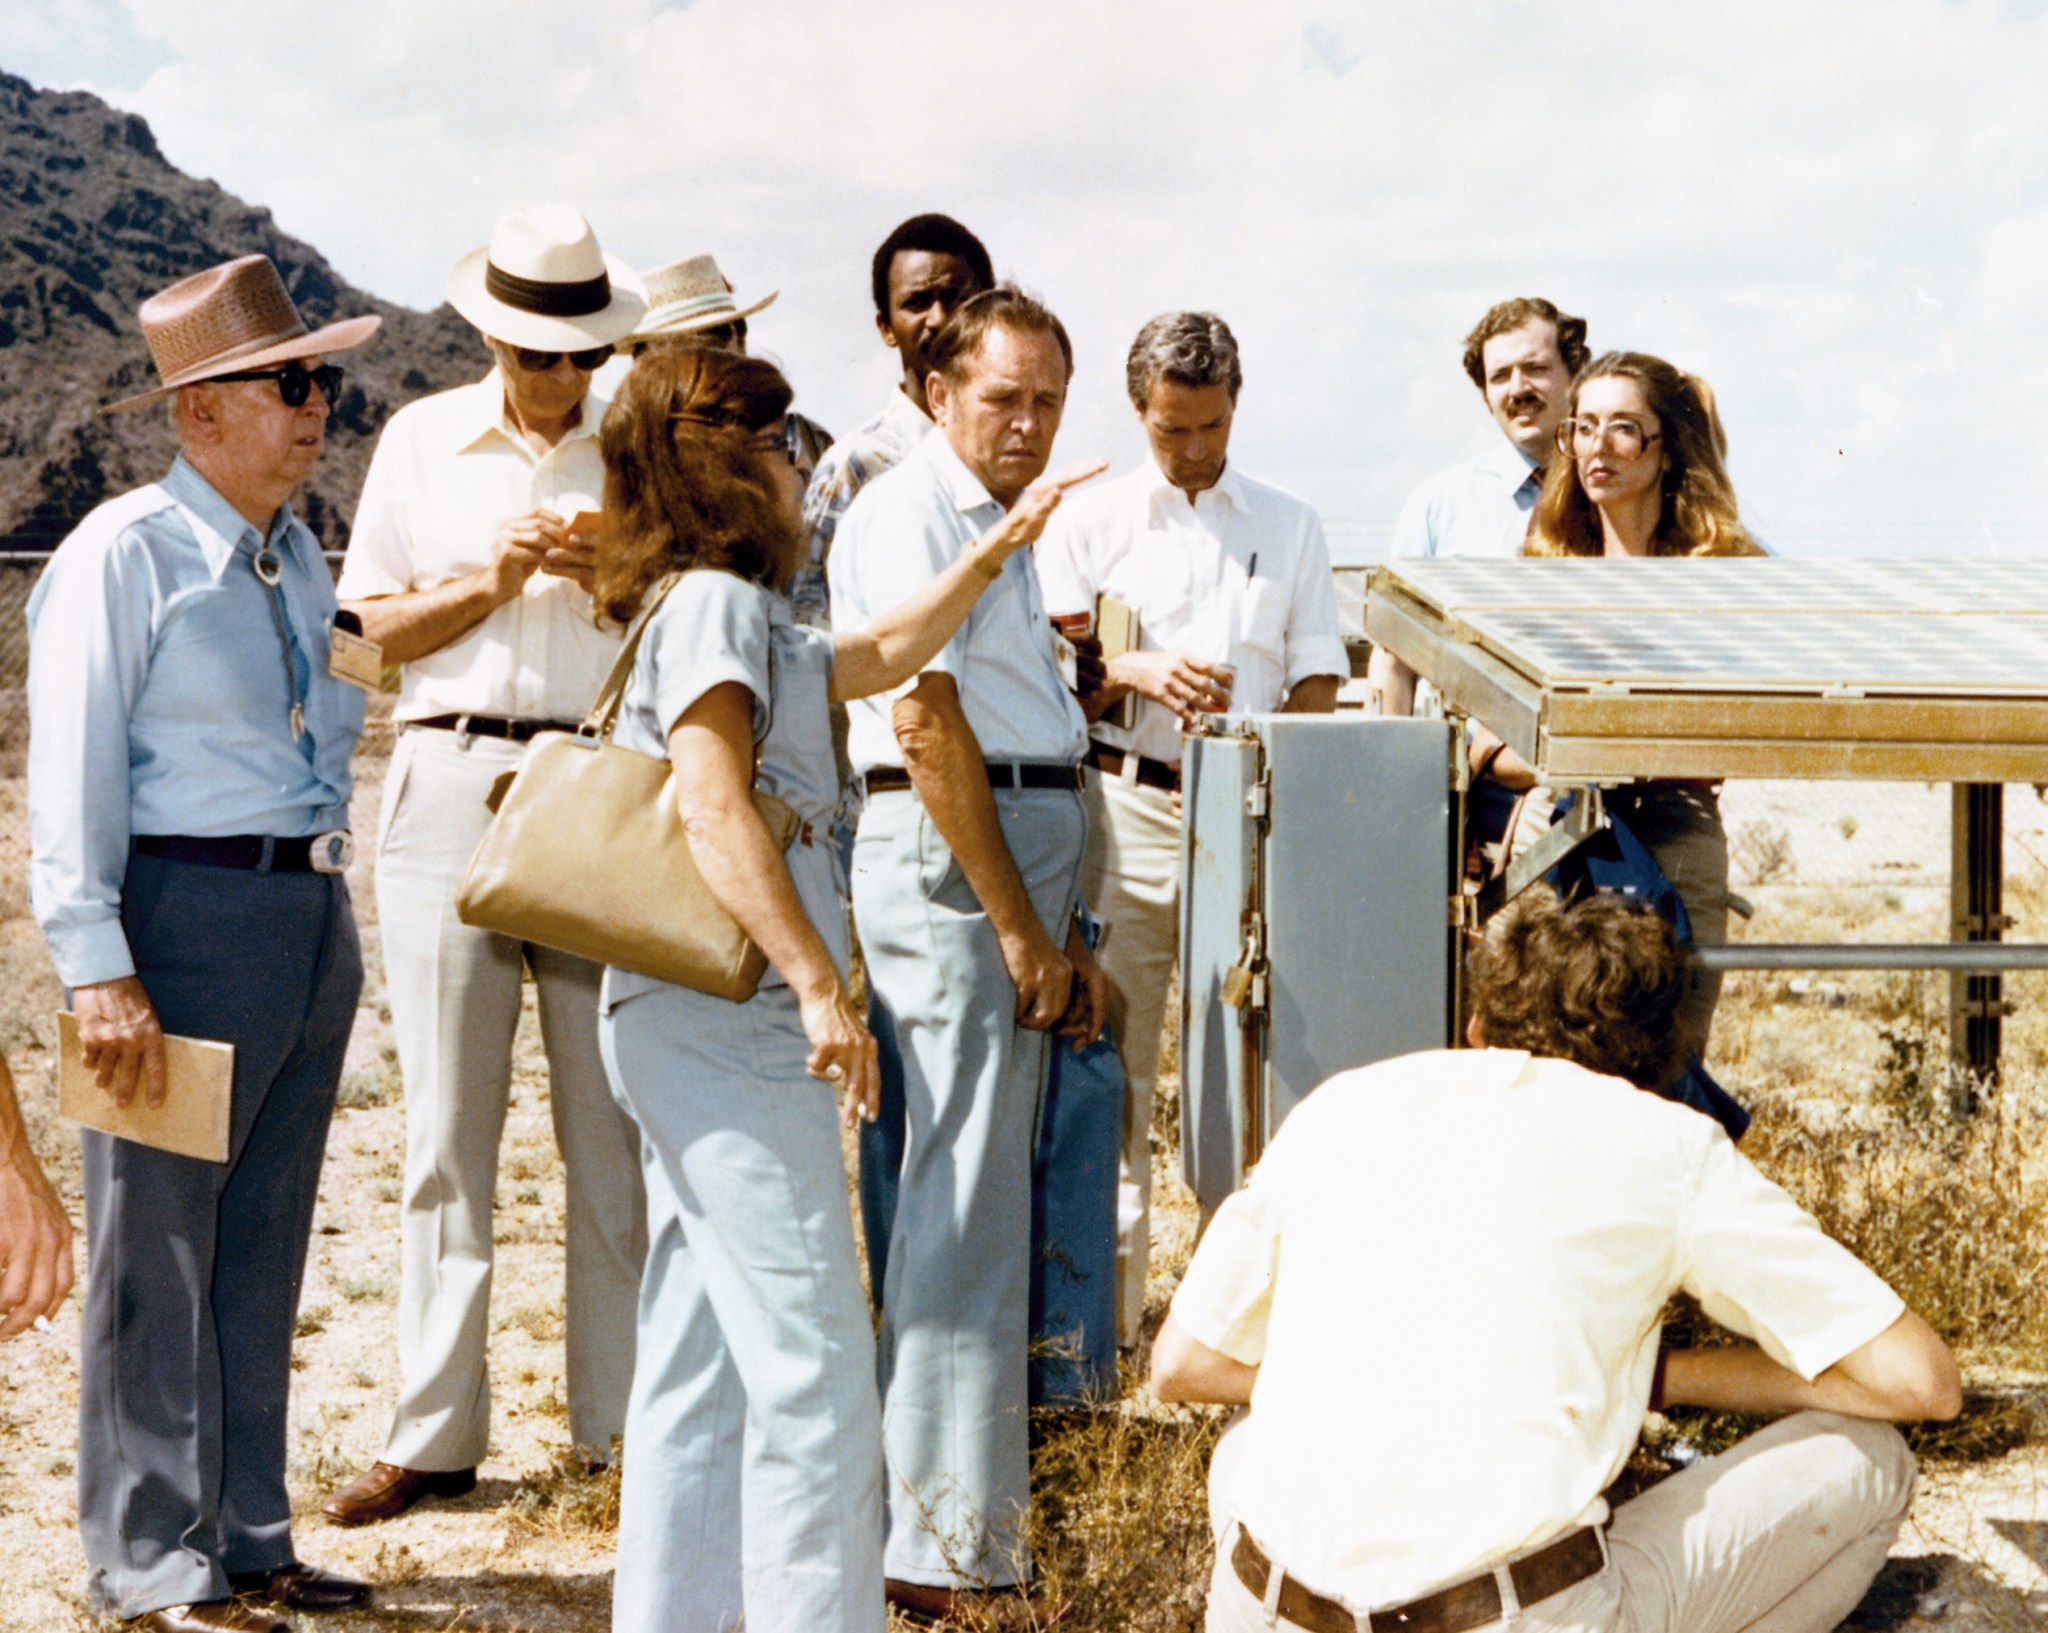 Group of people examining a solar array in desert.